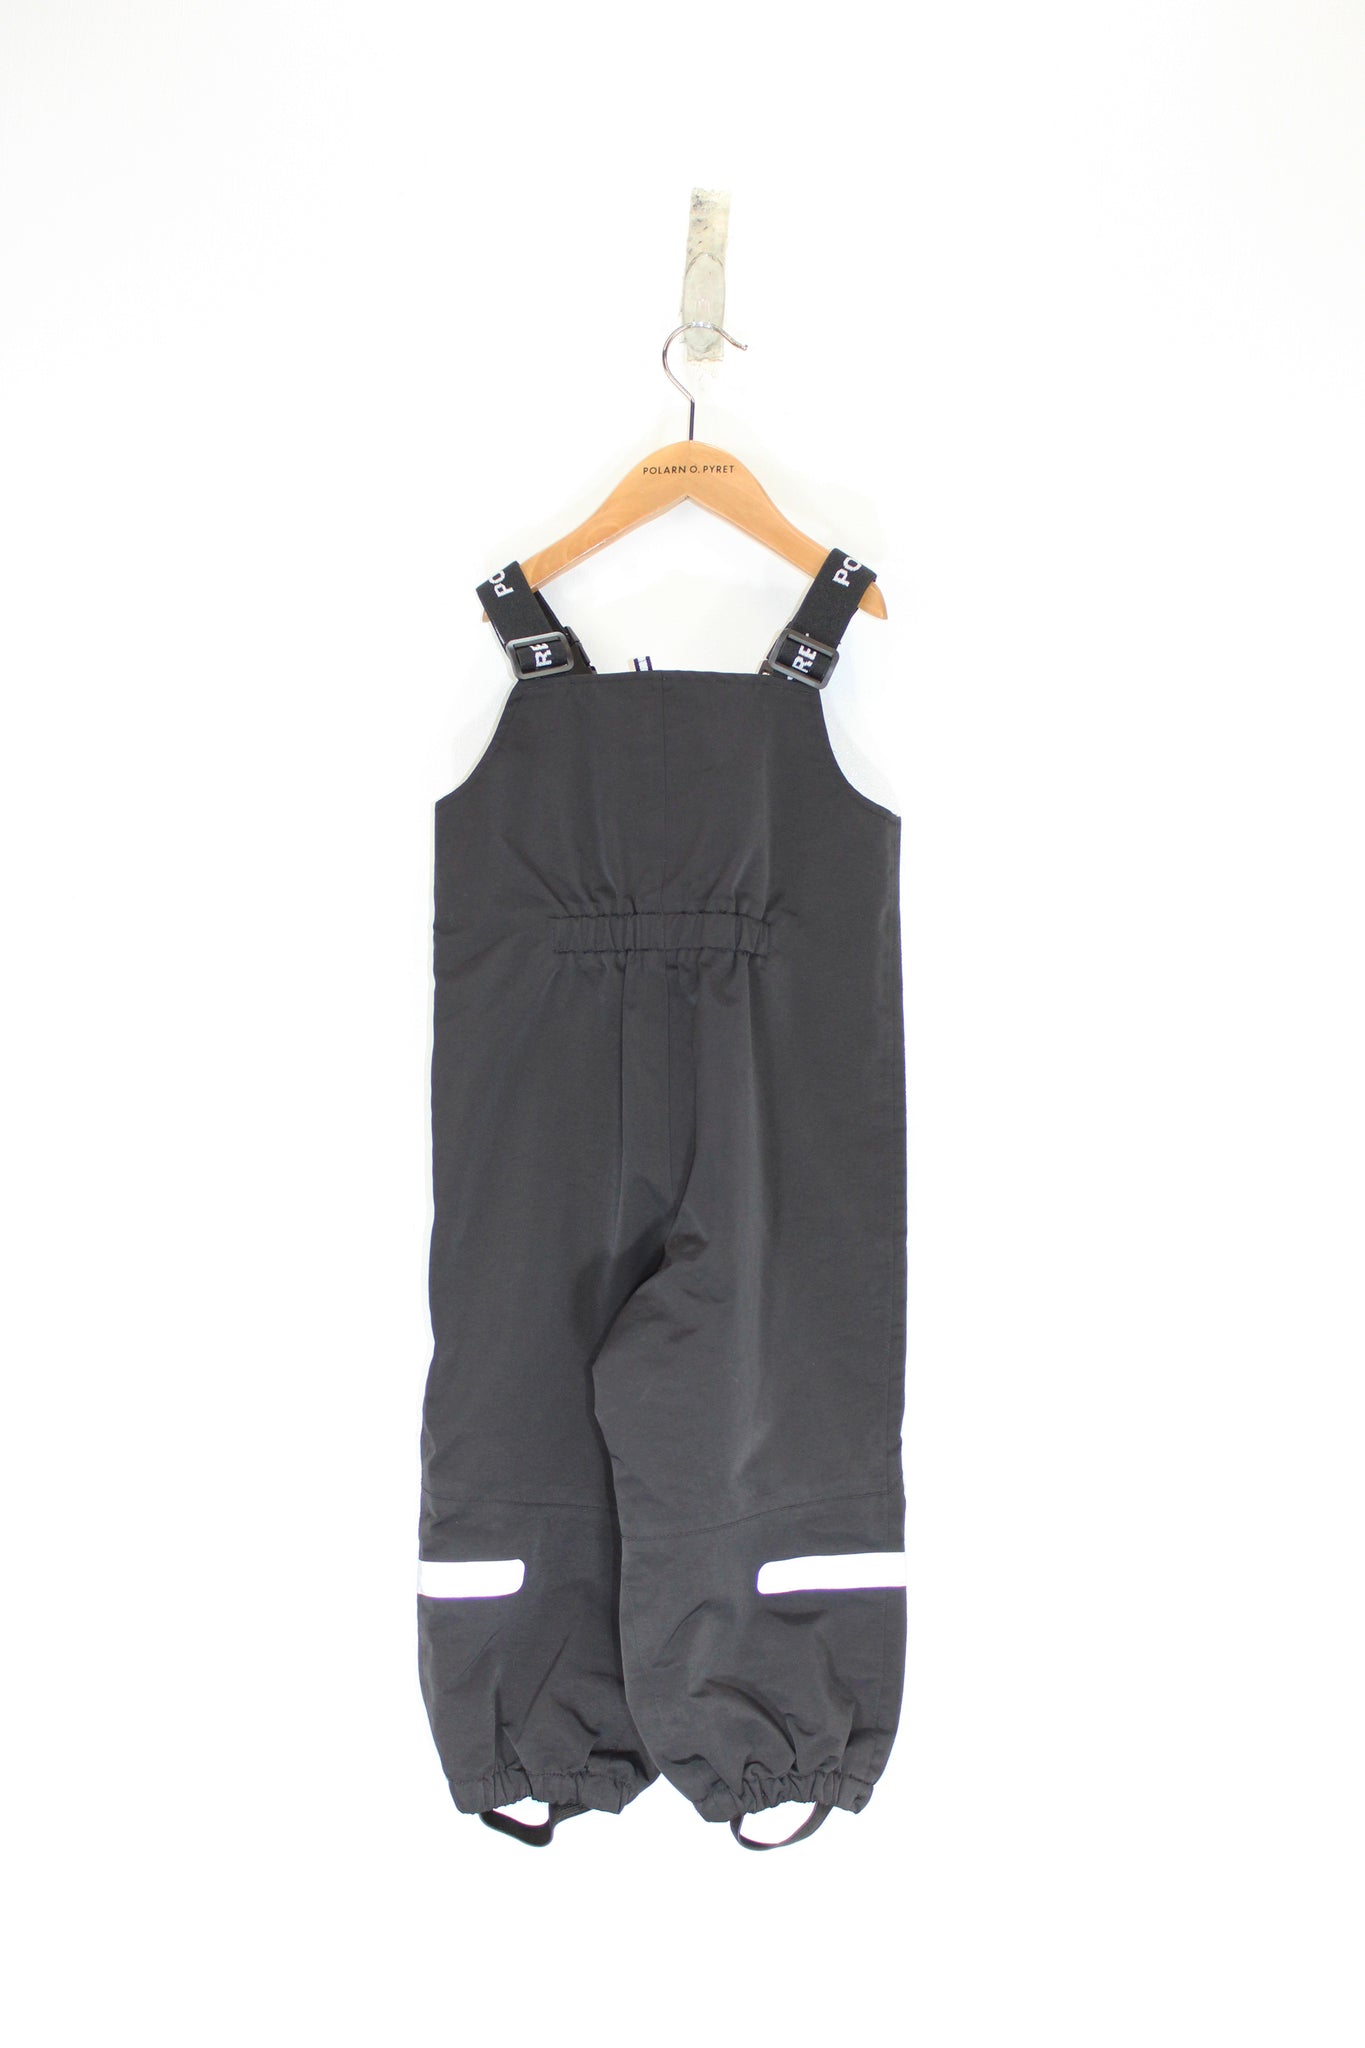 Kids Shell Trousers 1.5-2y / 92